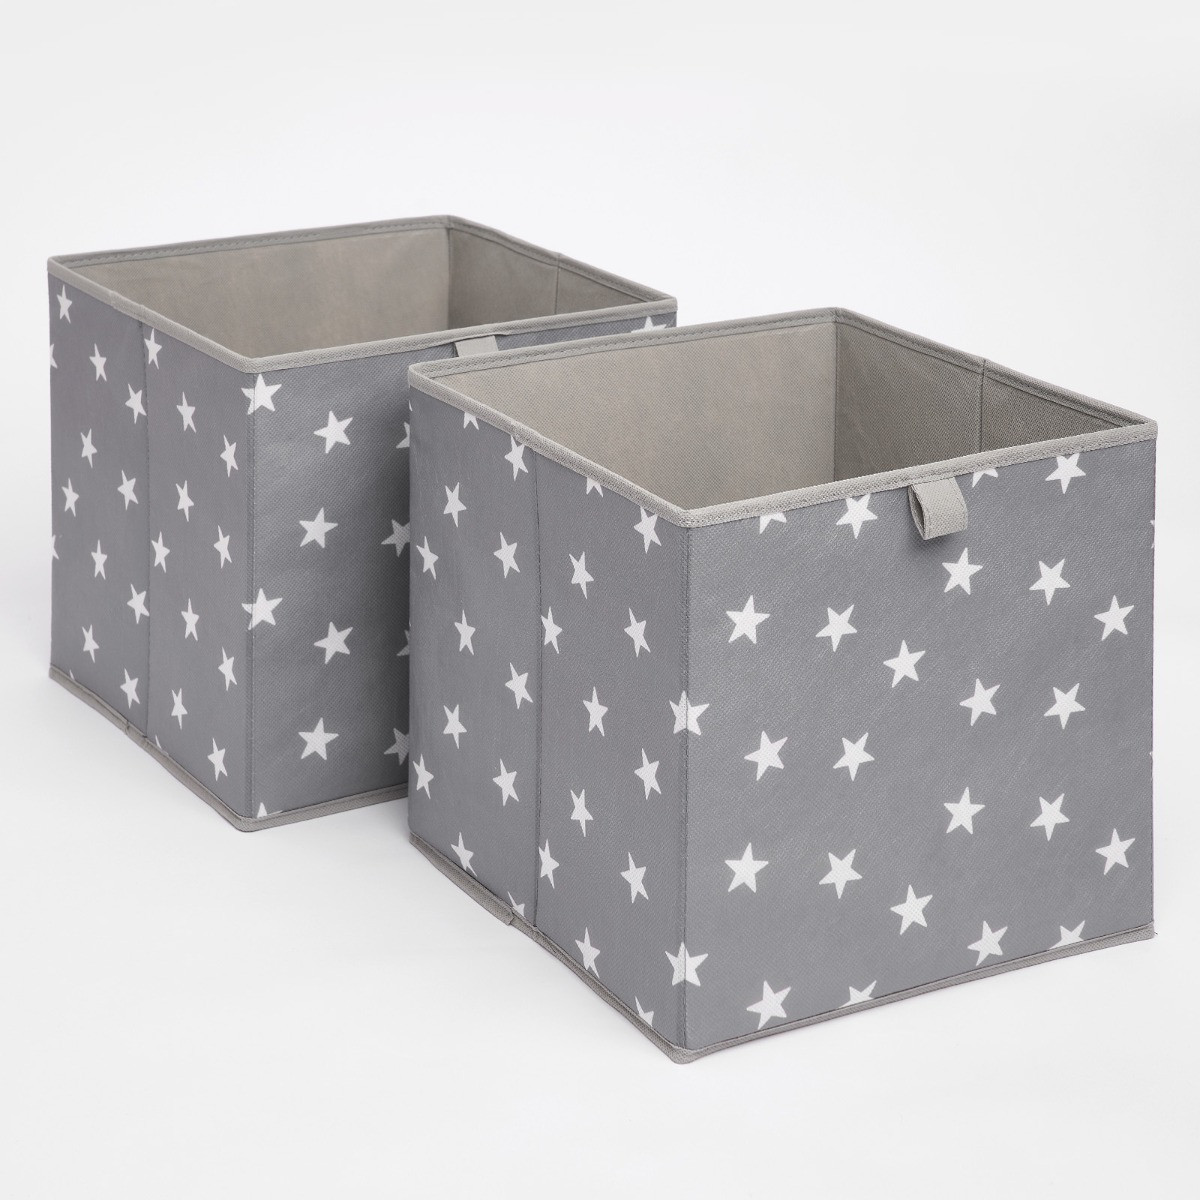 OHS Star Print Cube Storage Boxes, Grey - 2 pack>